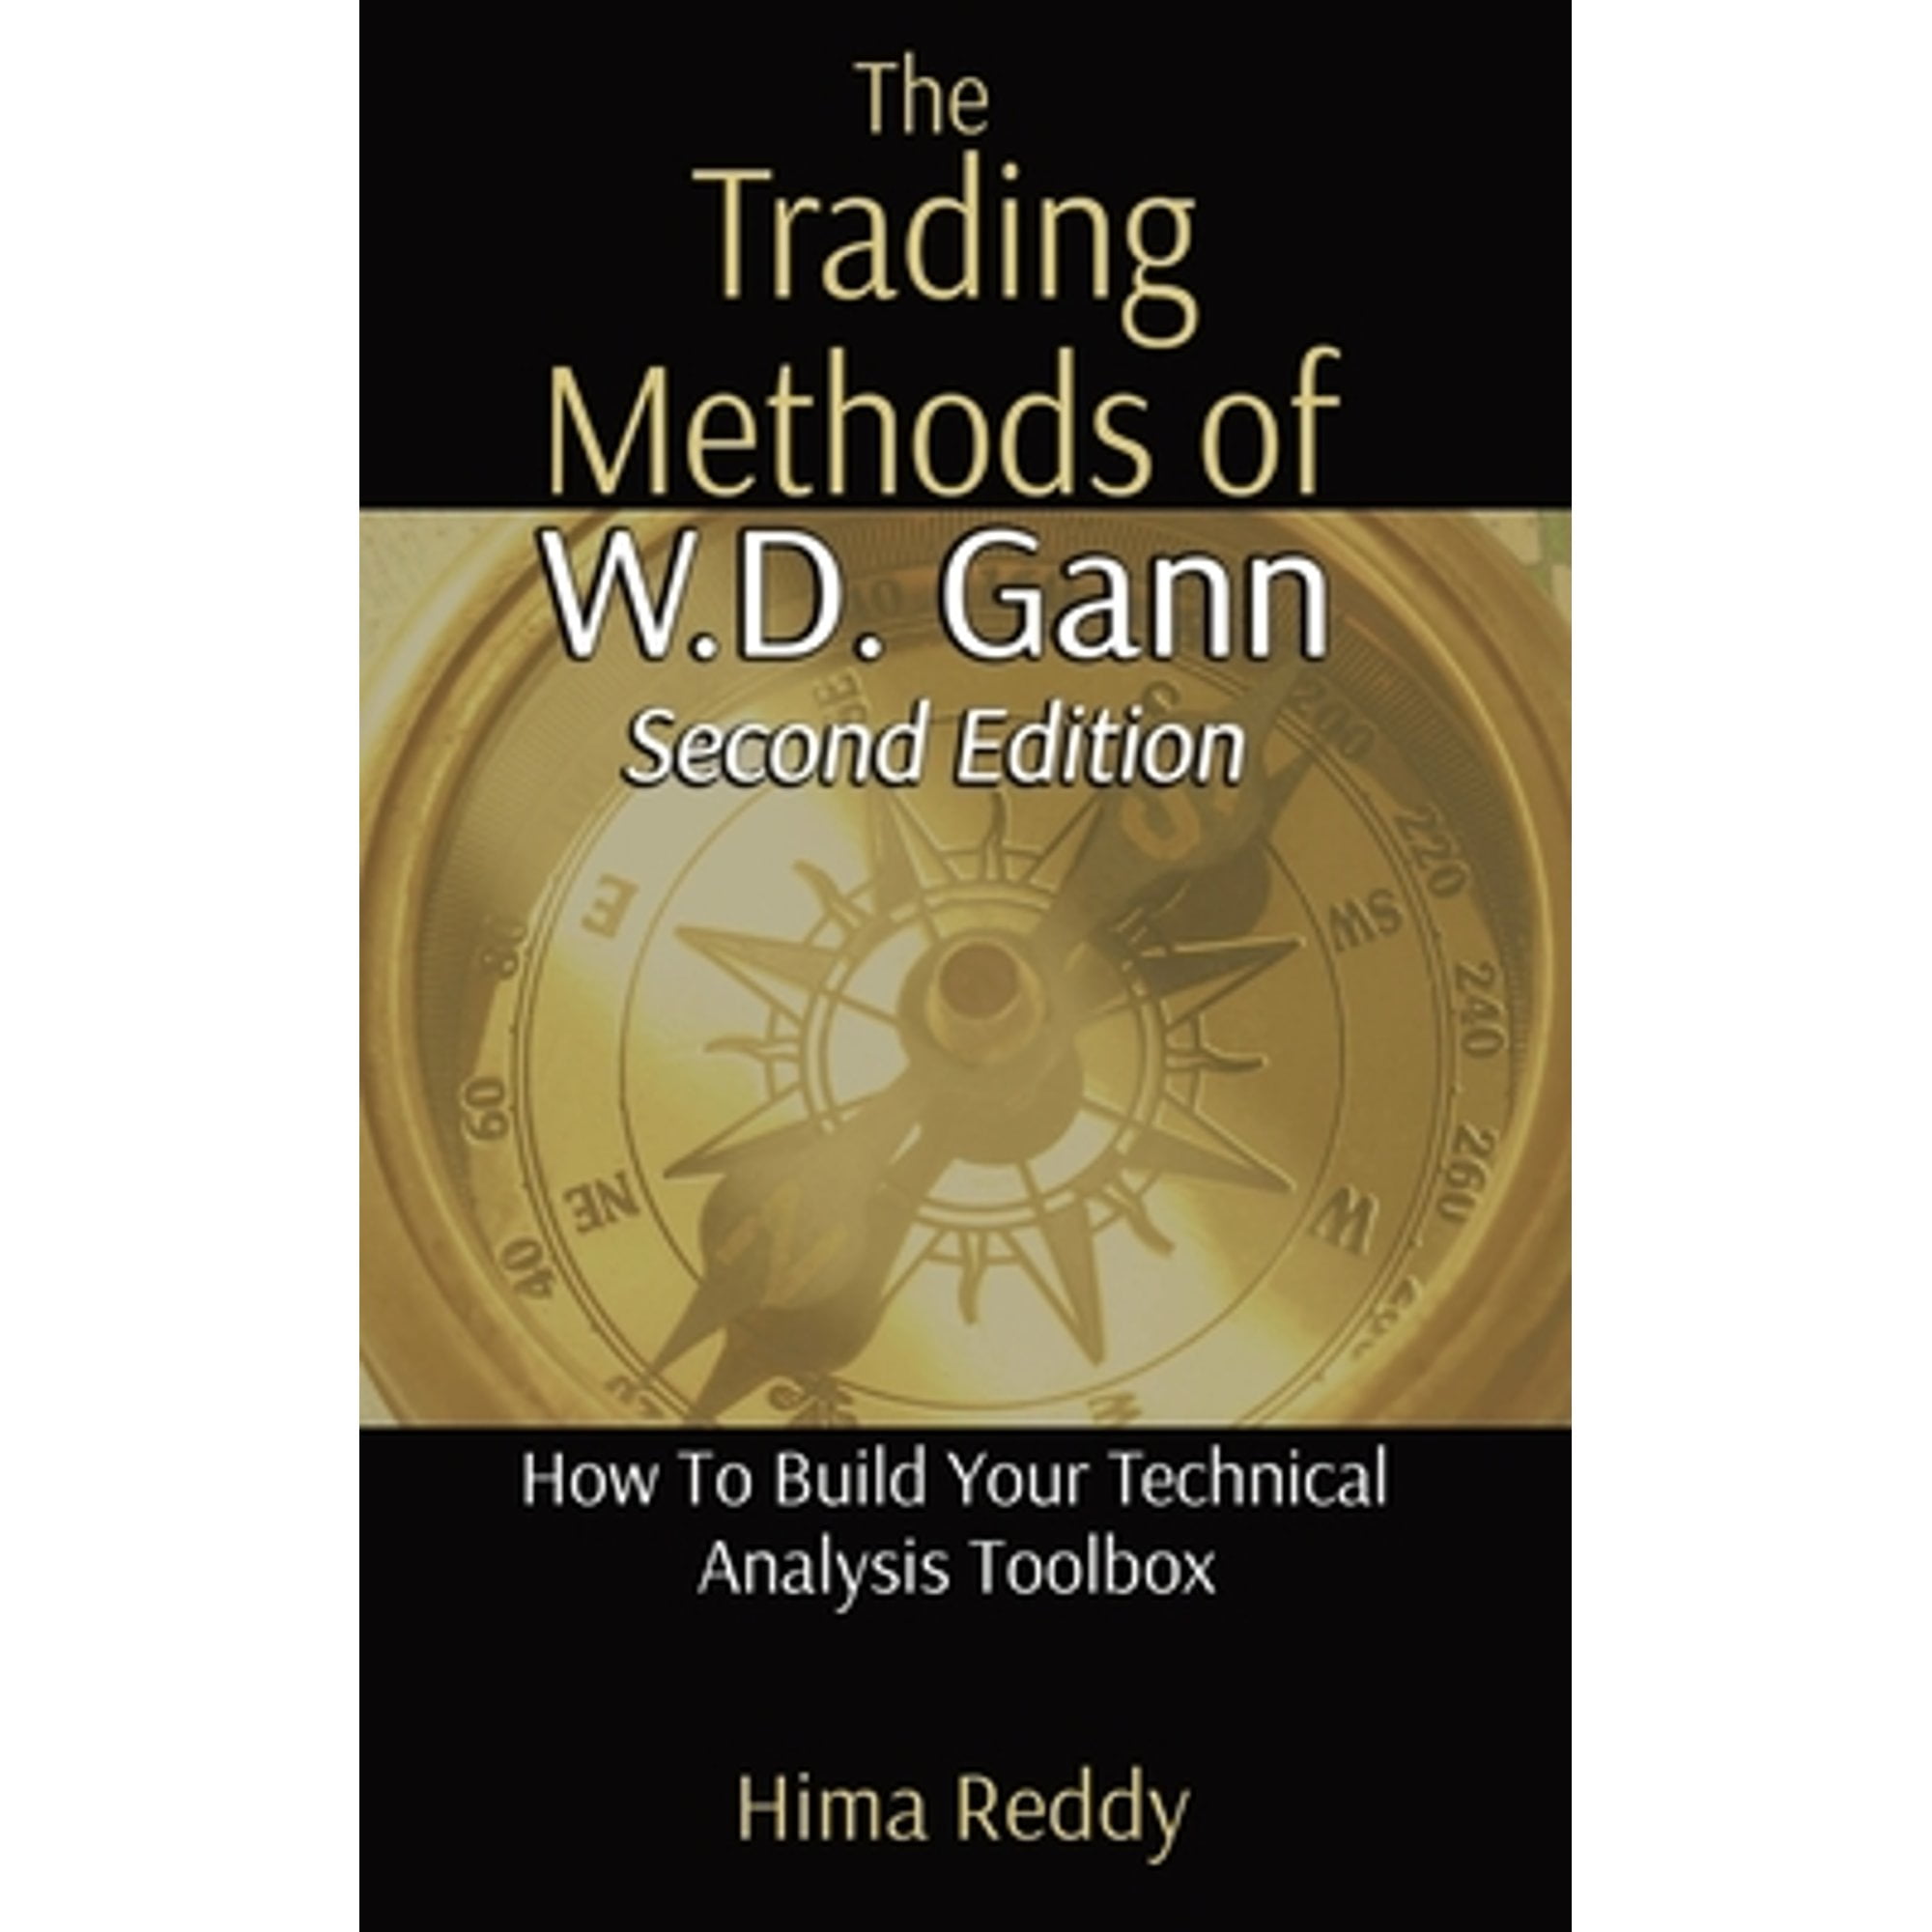 Pre-Owned The Trading Methods of W.D. Gann: How To Build Your Technical Analysis Toolbox (Hardcover) by Hima Reddy